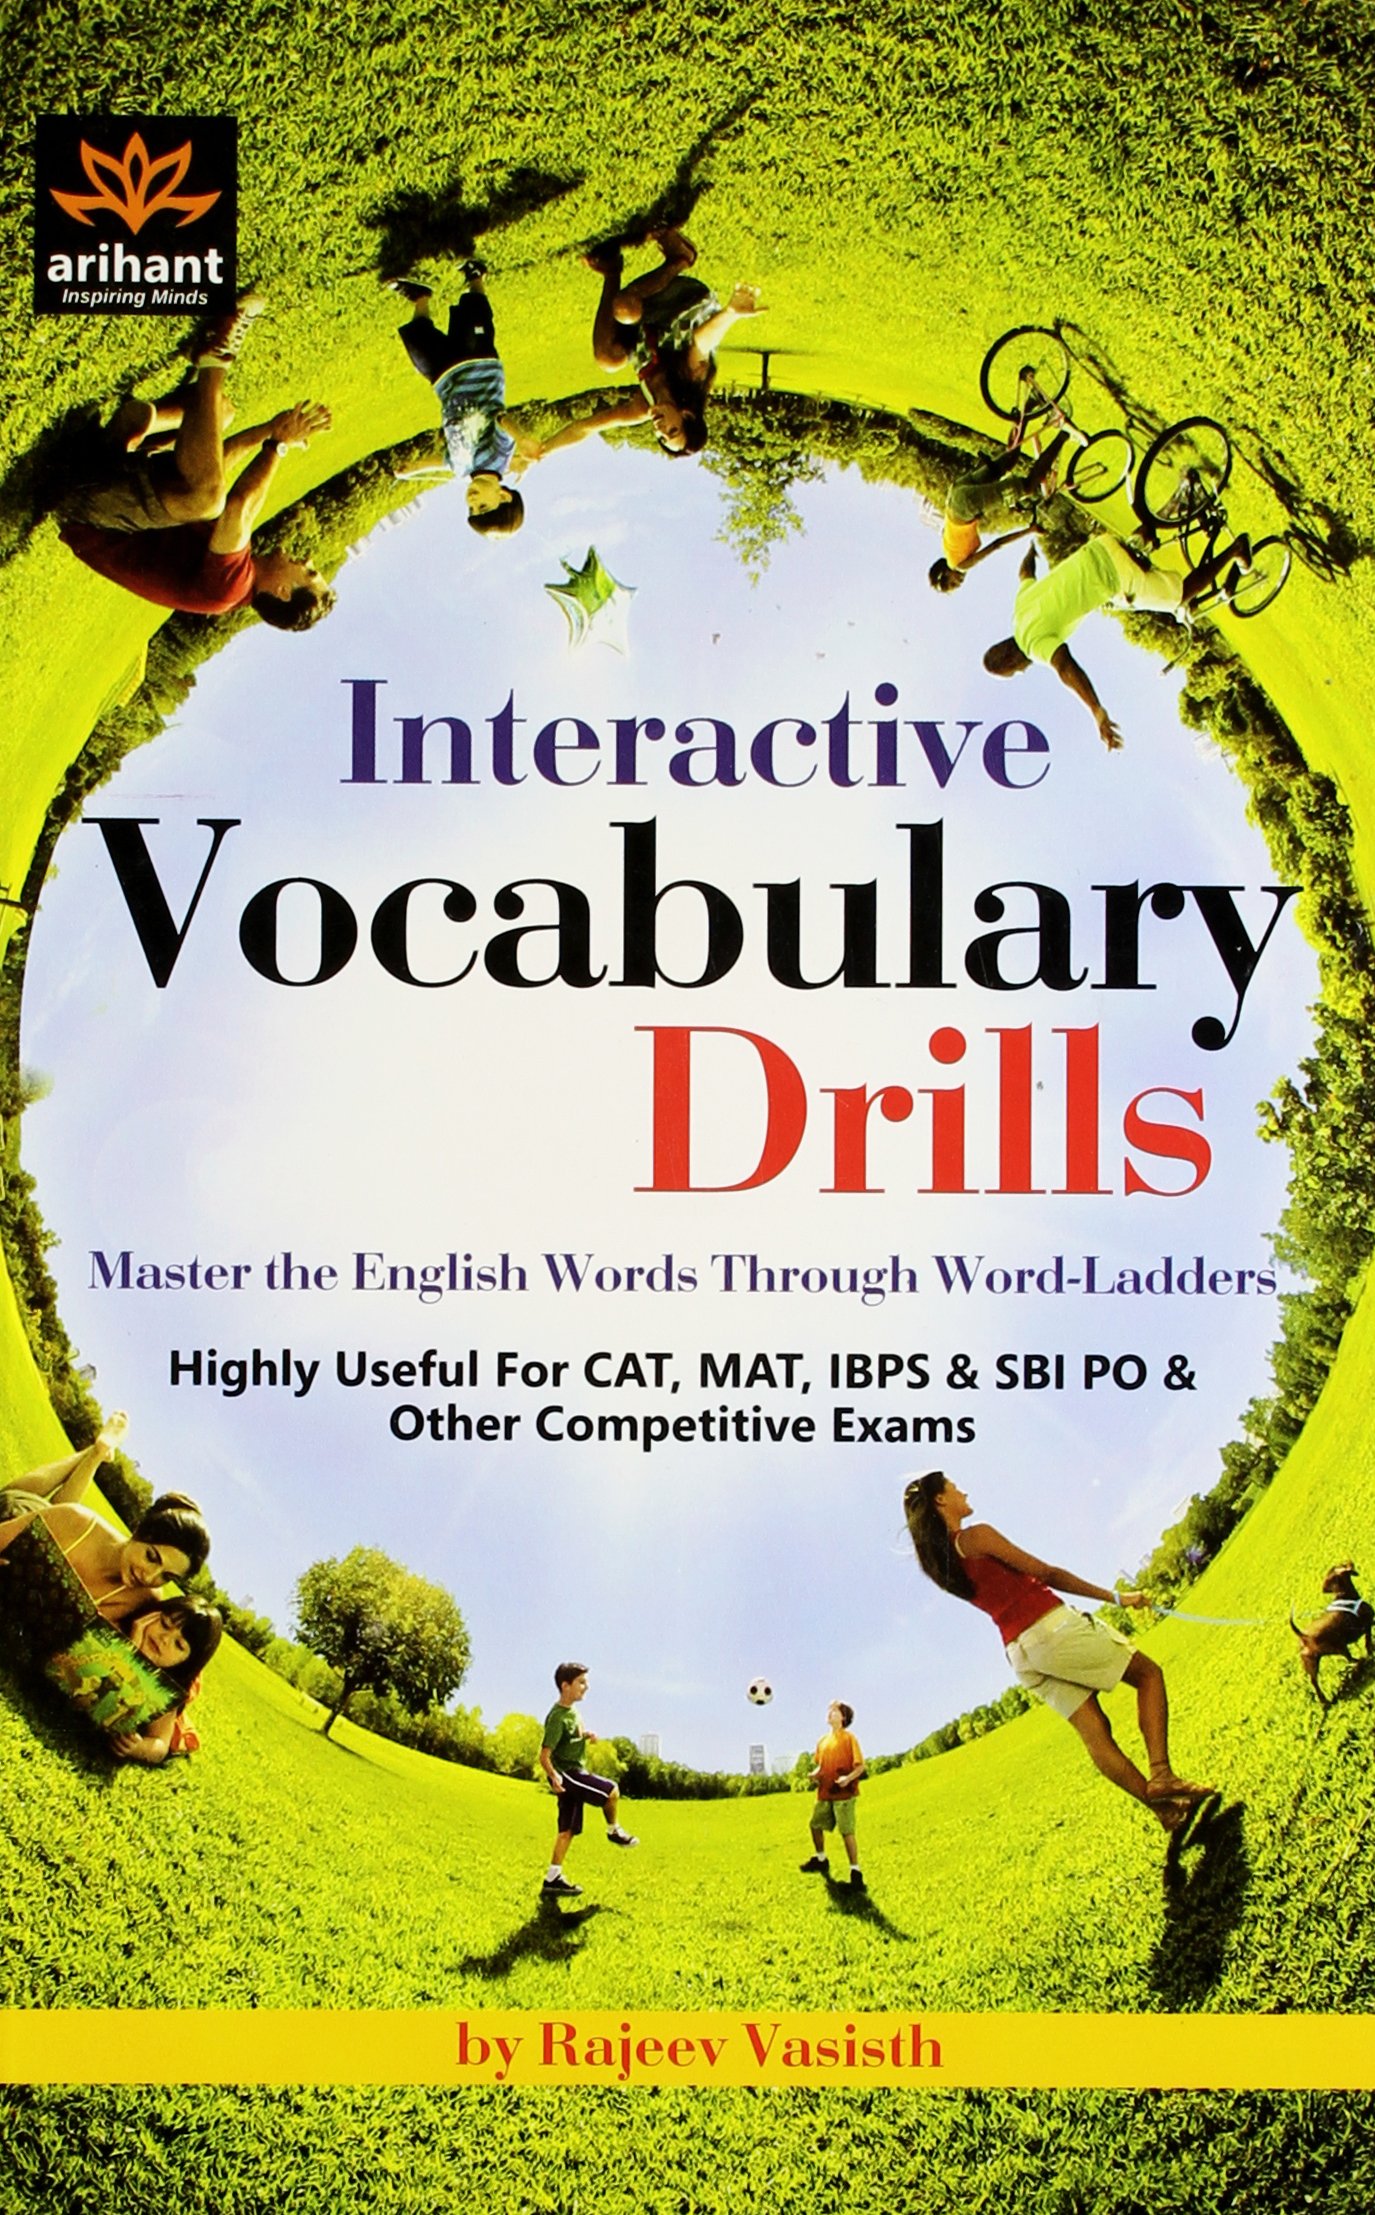 Interactive Vocabulary Drills Master the English Words Through Word-Ladders